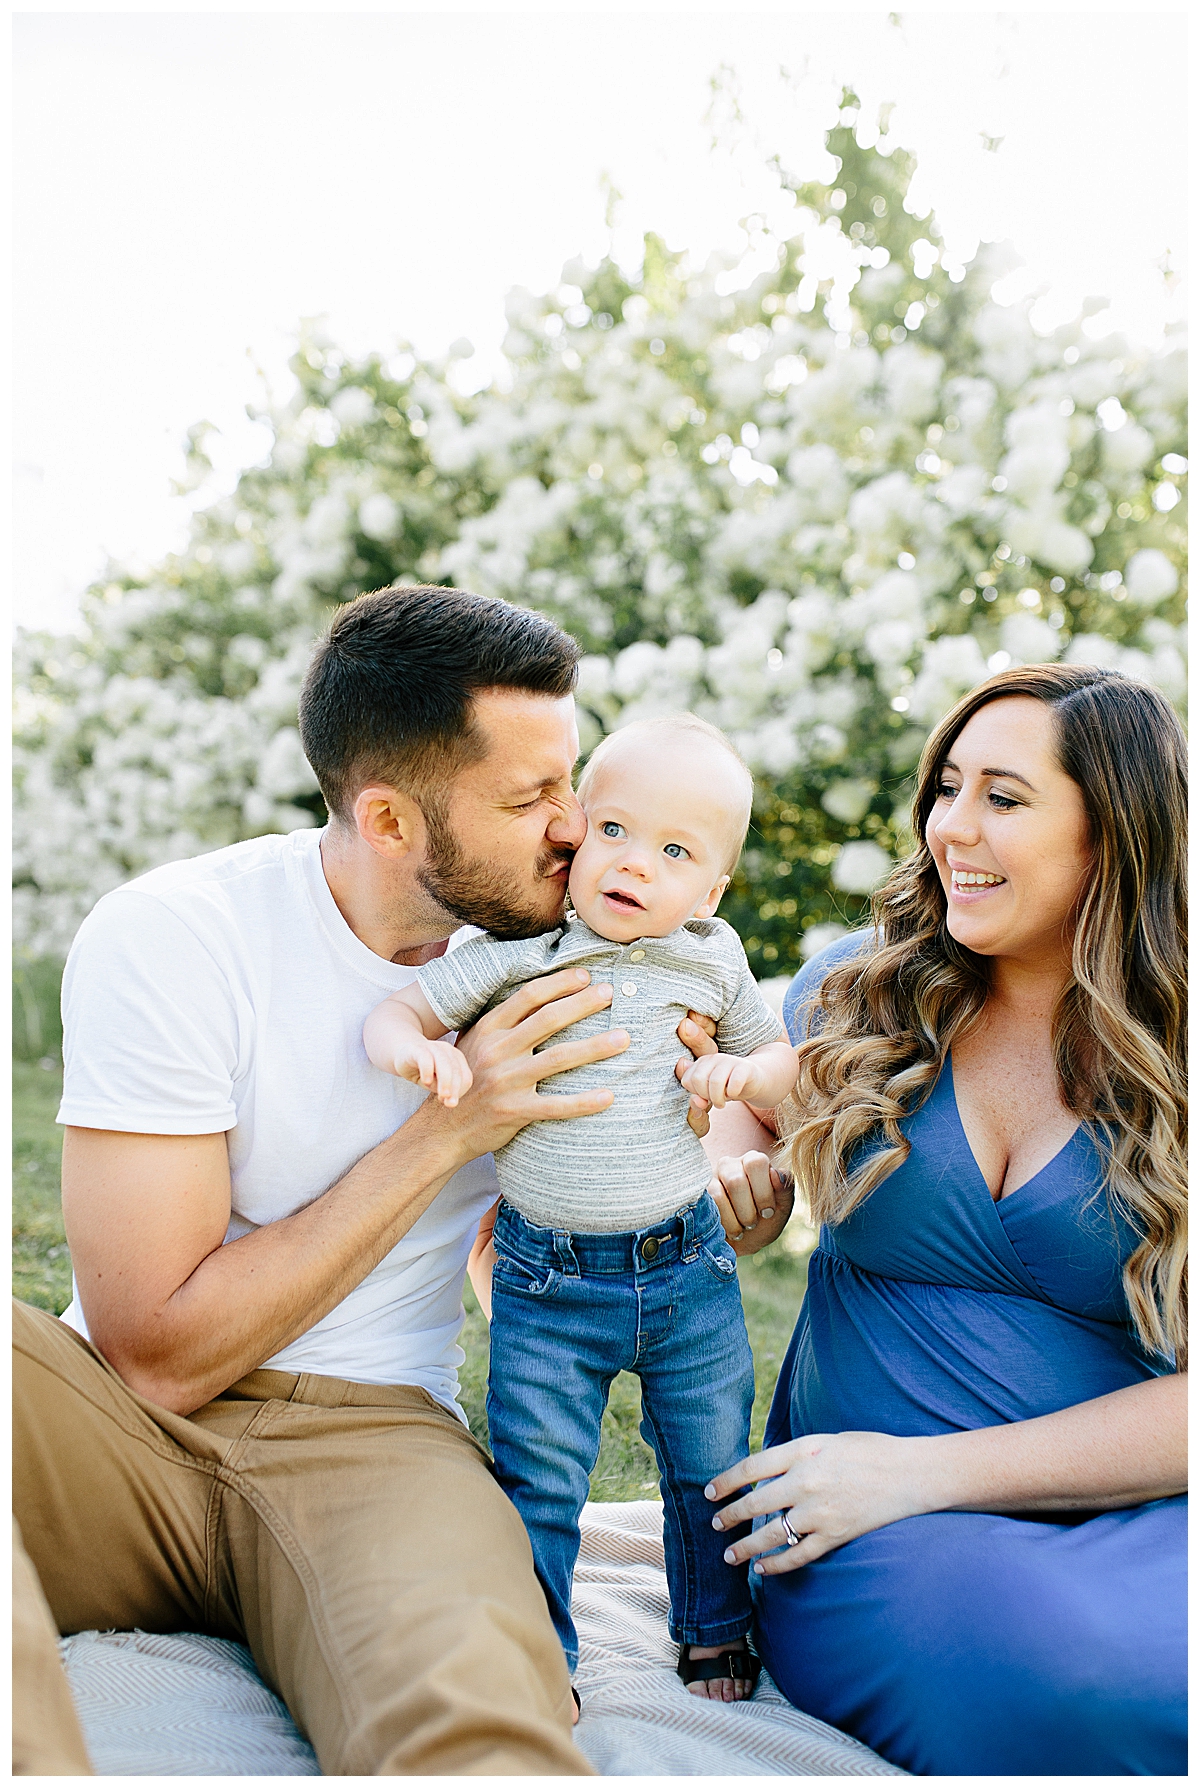  Wollam Gardens Spring Family Session